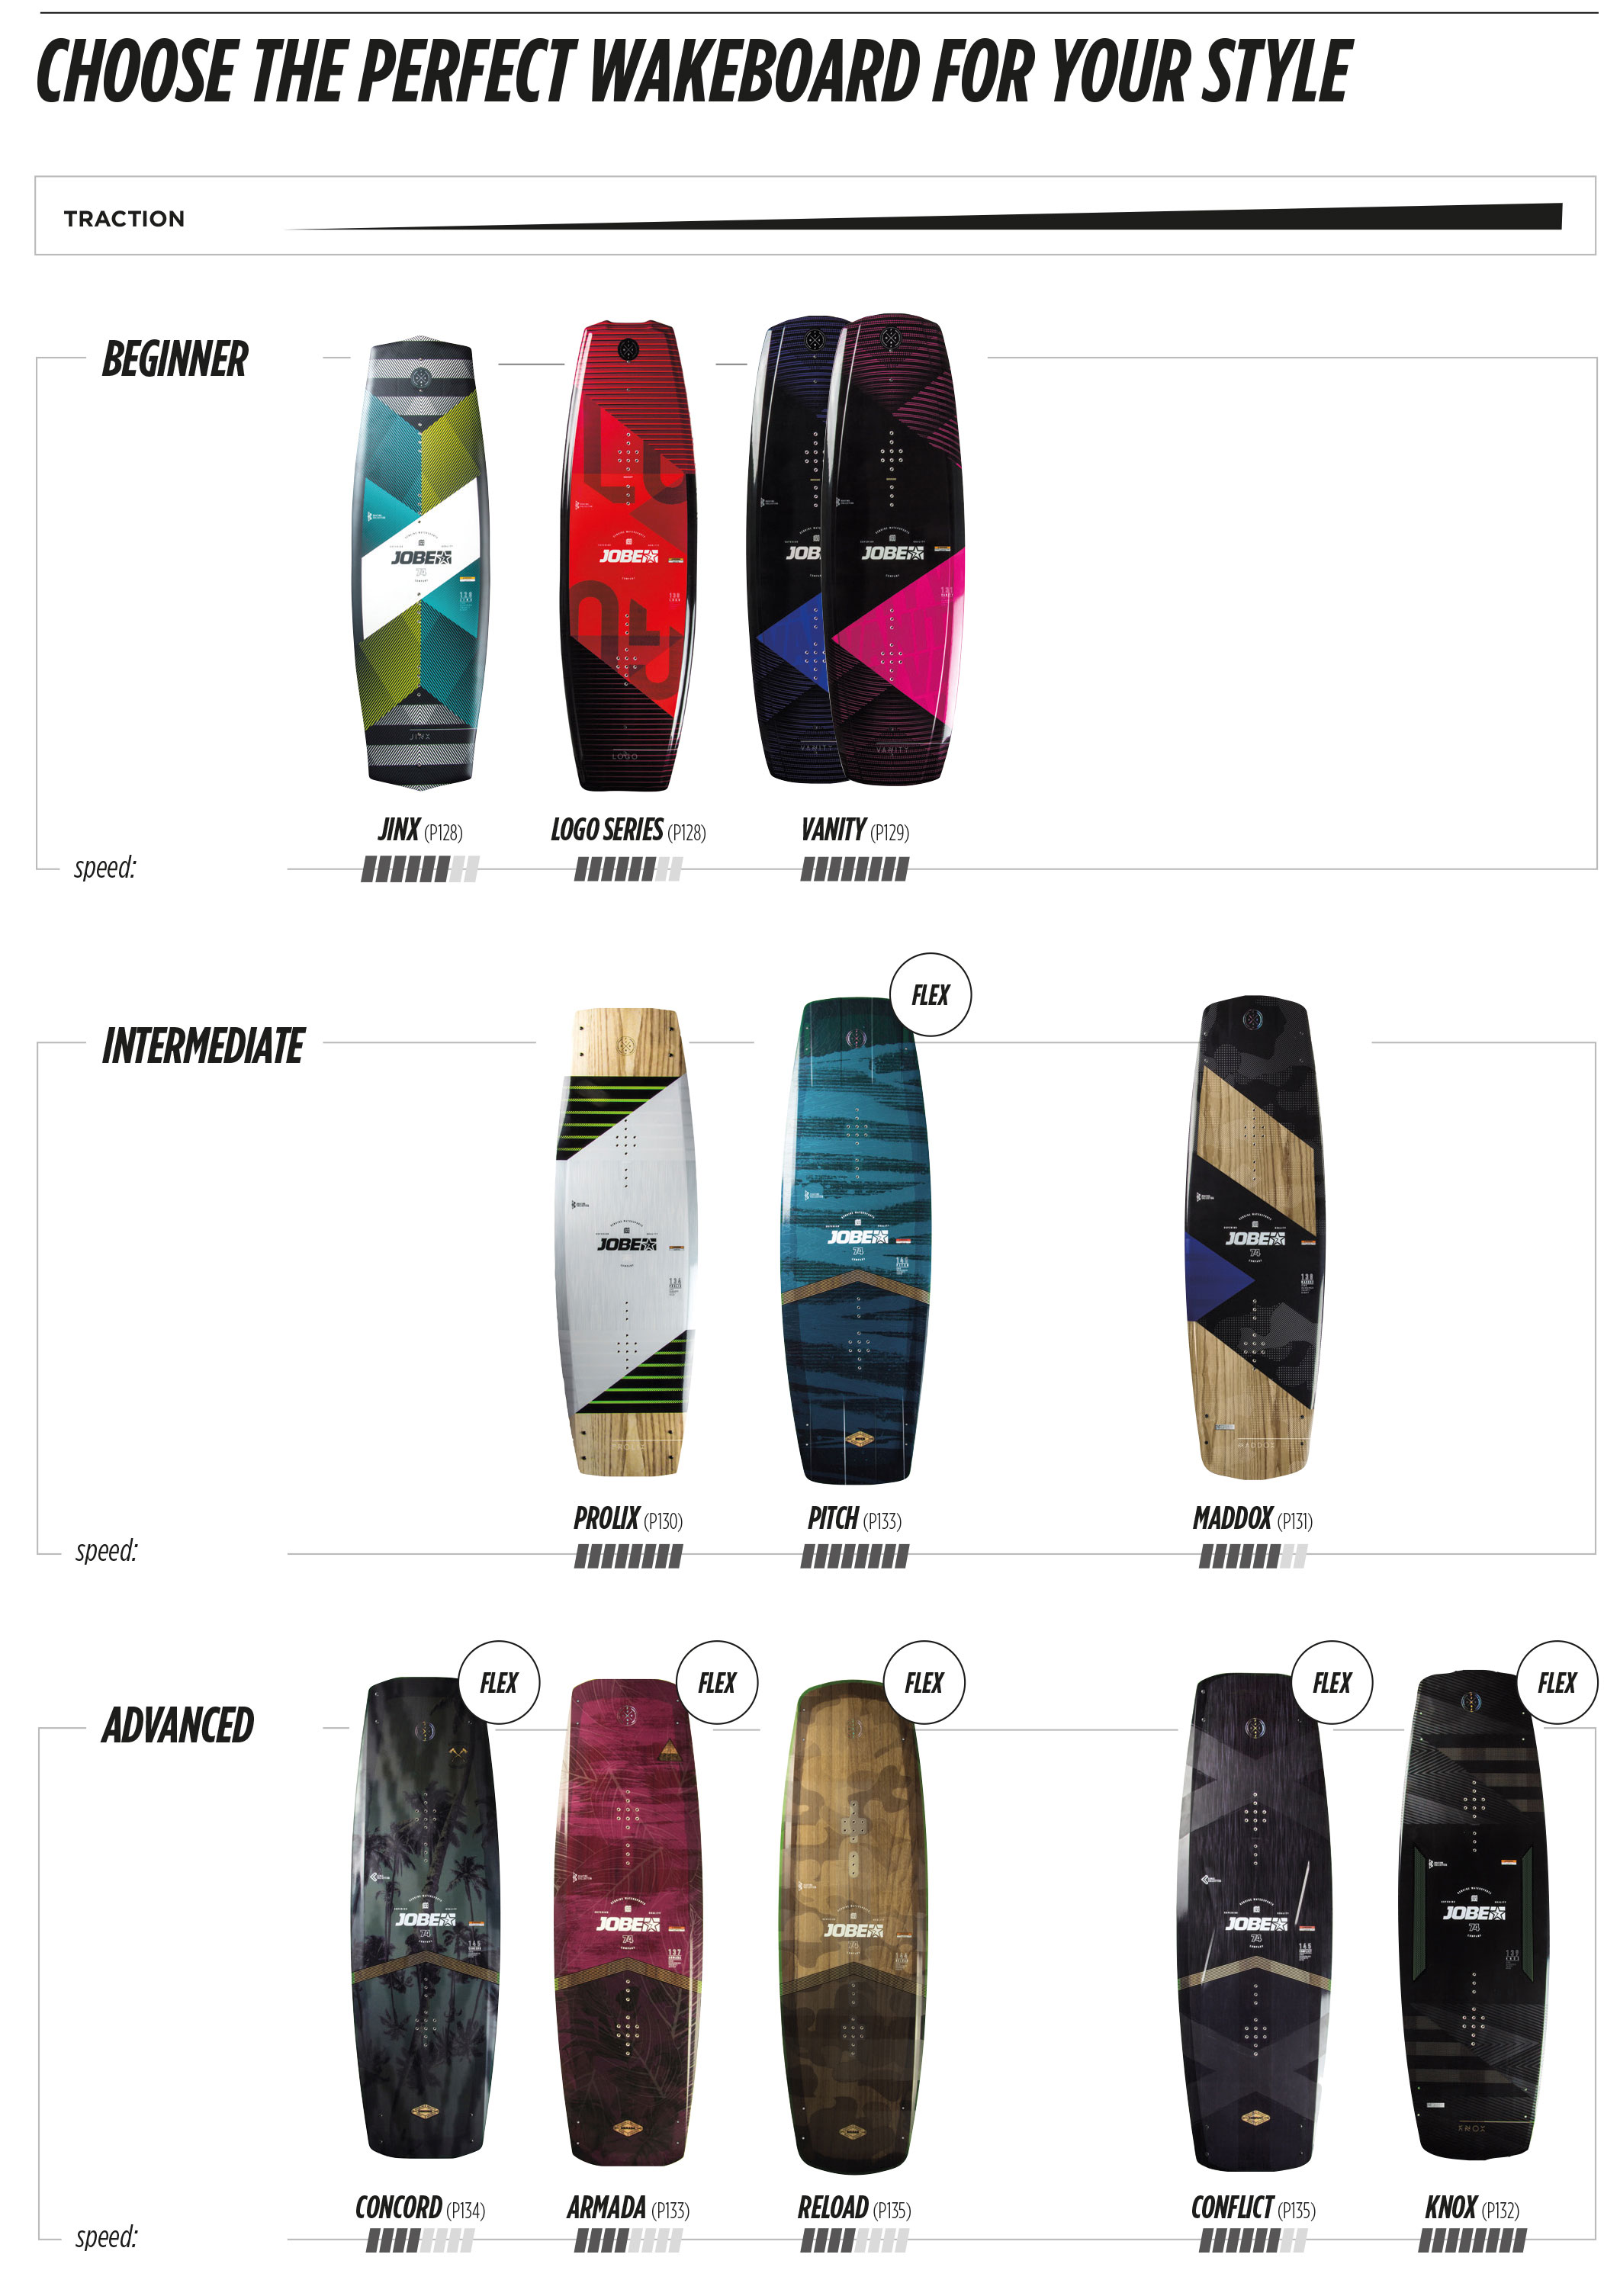 A wakeboard collection for everyone